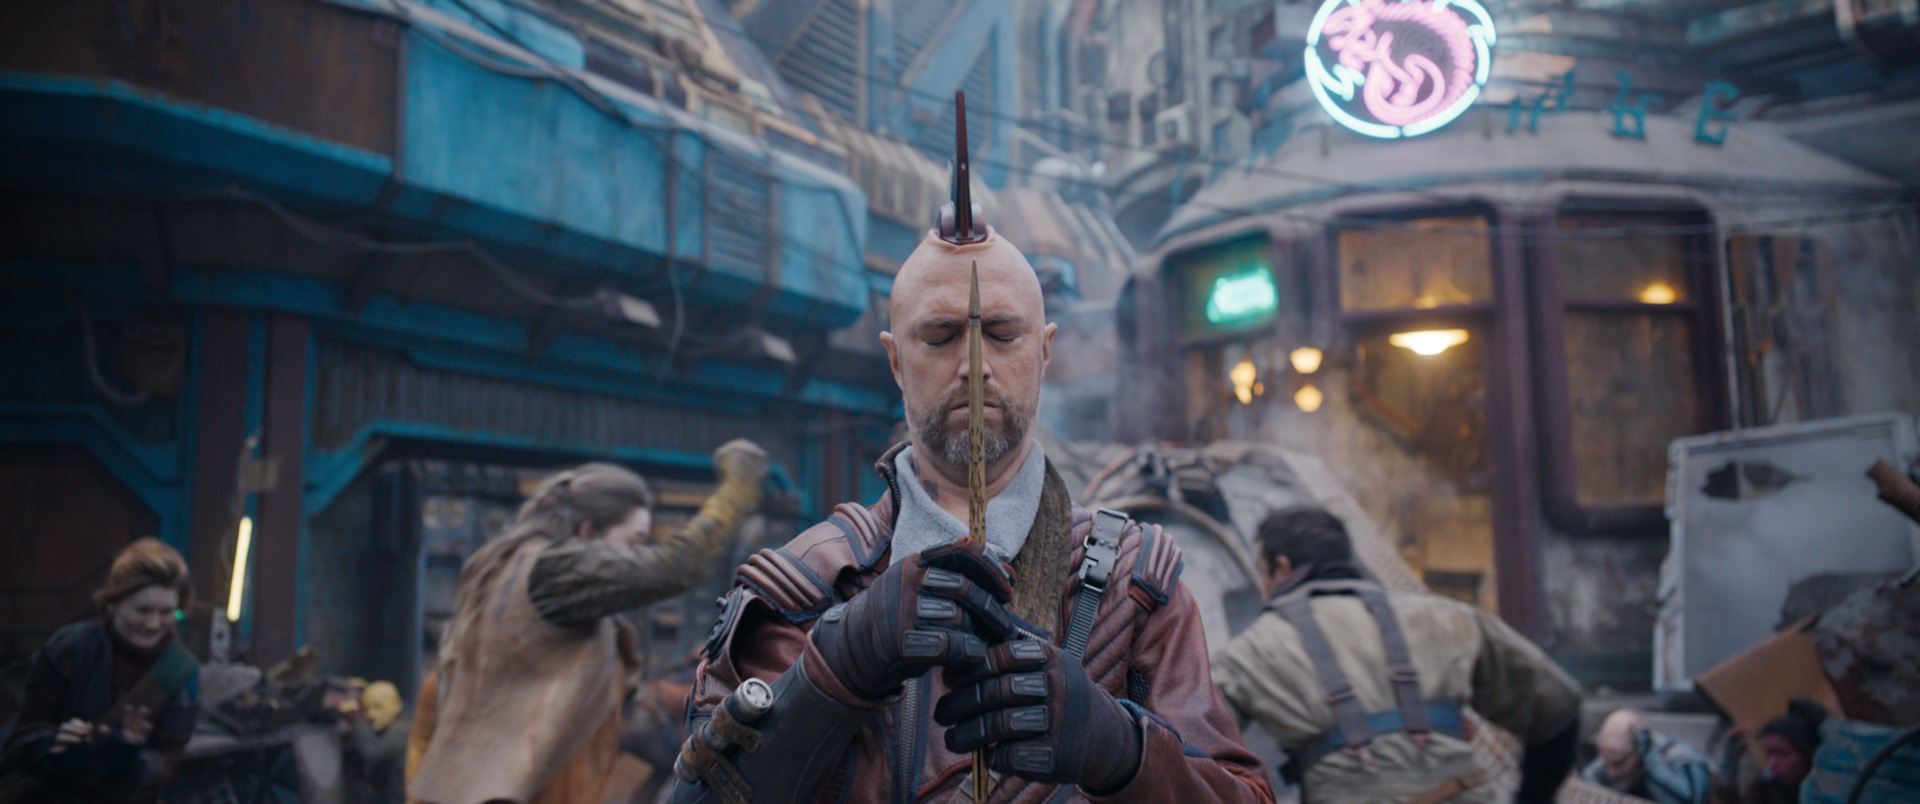 An image of Sean Gunn as Kraglin in Guardians of the Galaxy Vol. 3. Channeling his metallic mohawk, he shuts his eyes and grips the Yaka arrow to concentrate. Around him, people are running through a chaotic marketplace.